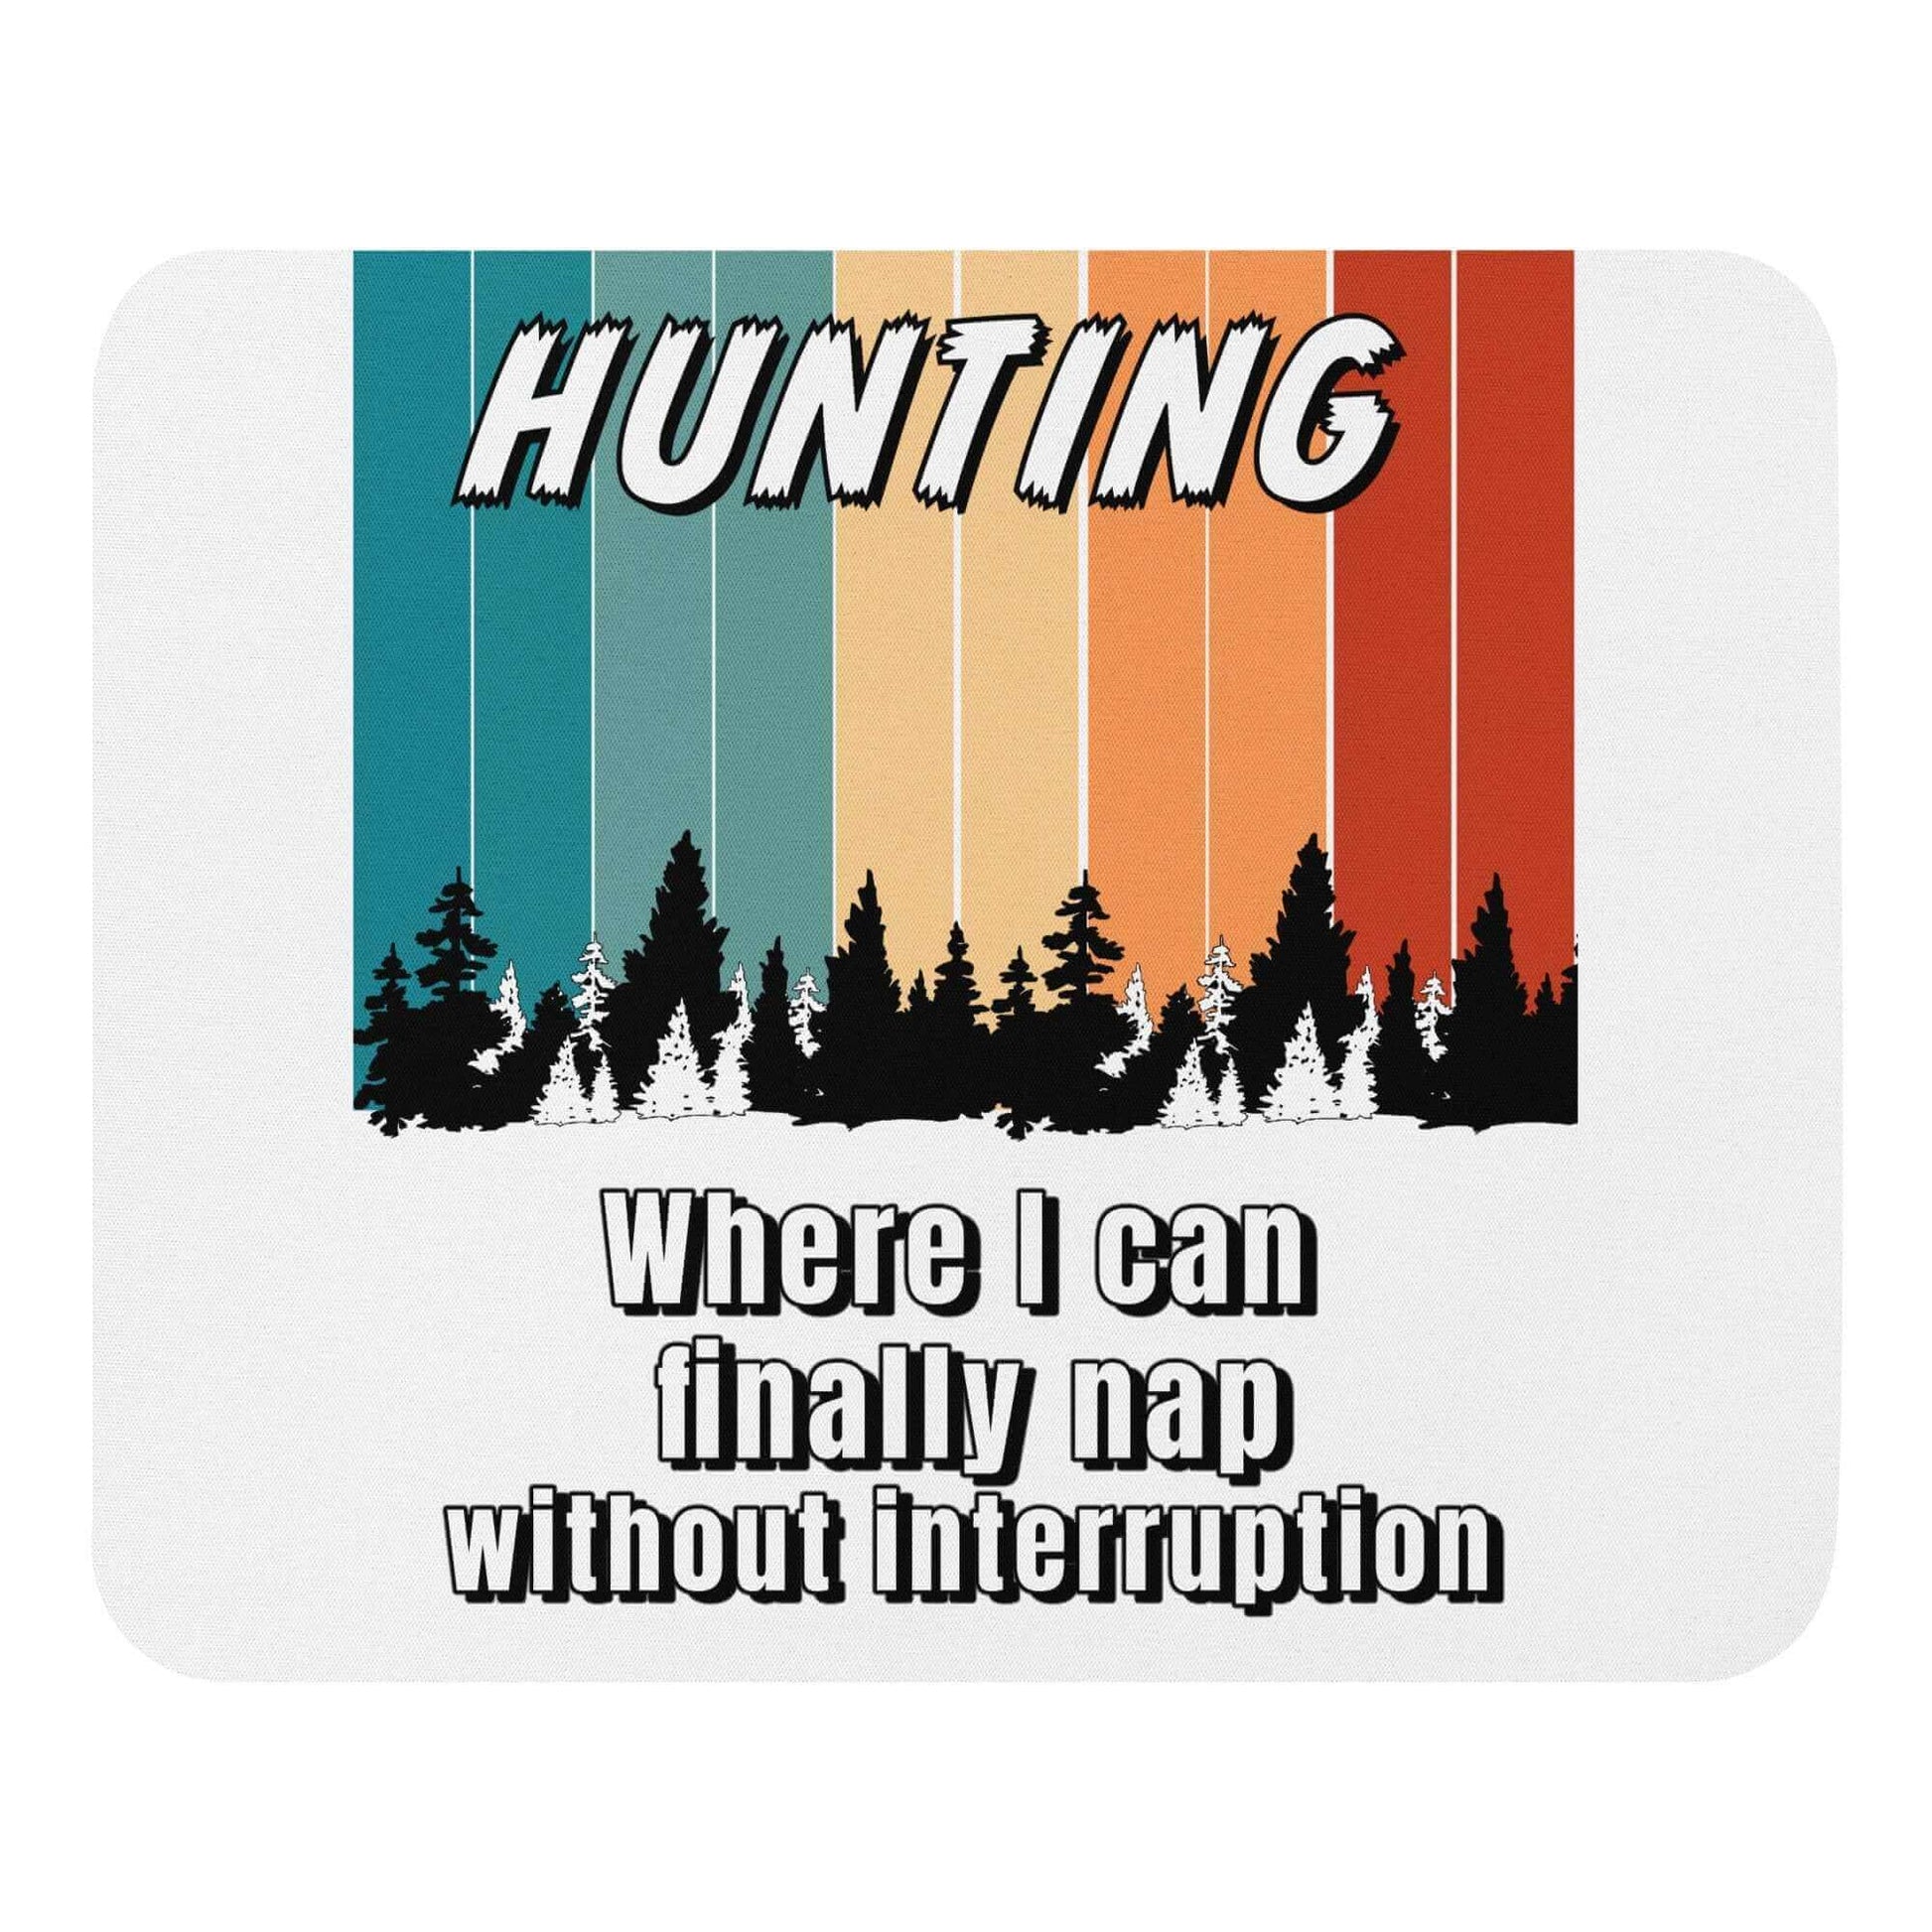 HUNTING - Where I get to nap without interruption - Mouse pad funny mouse pad hunting mouse pad nap sleep